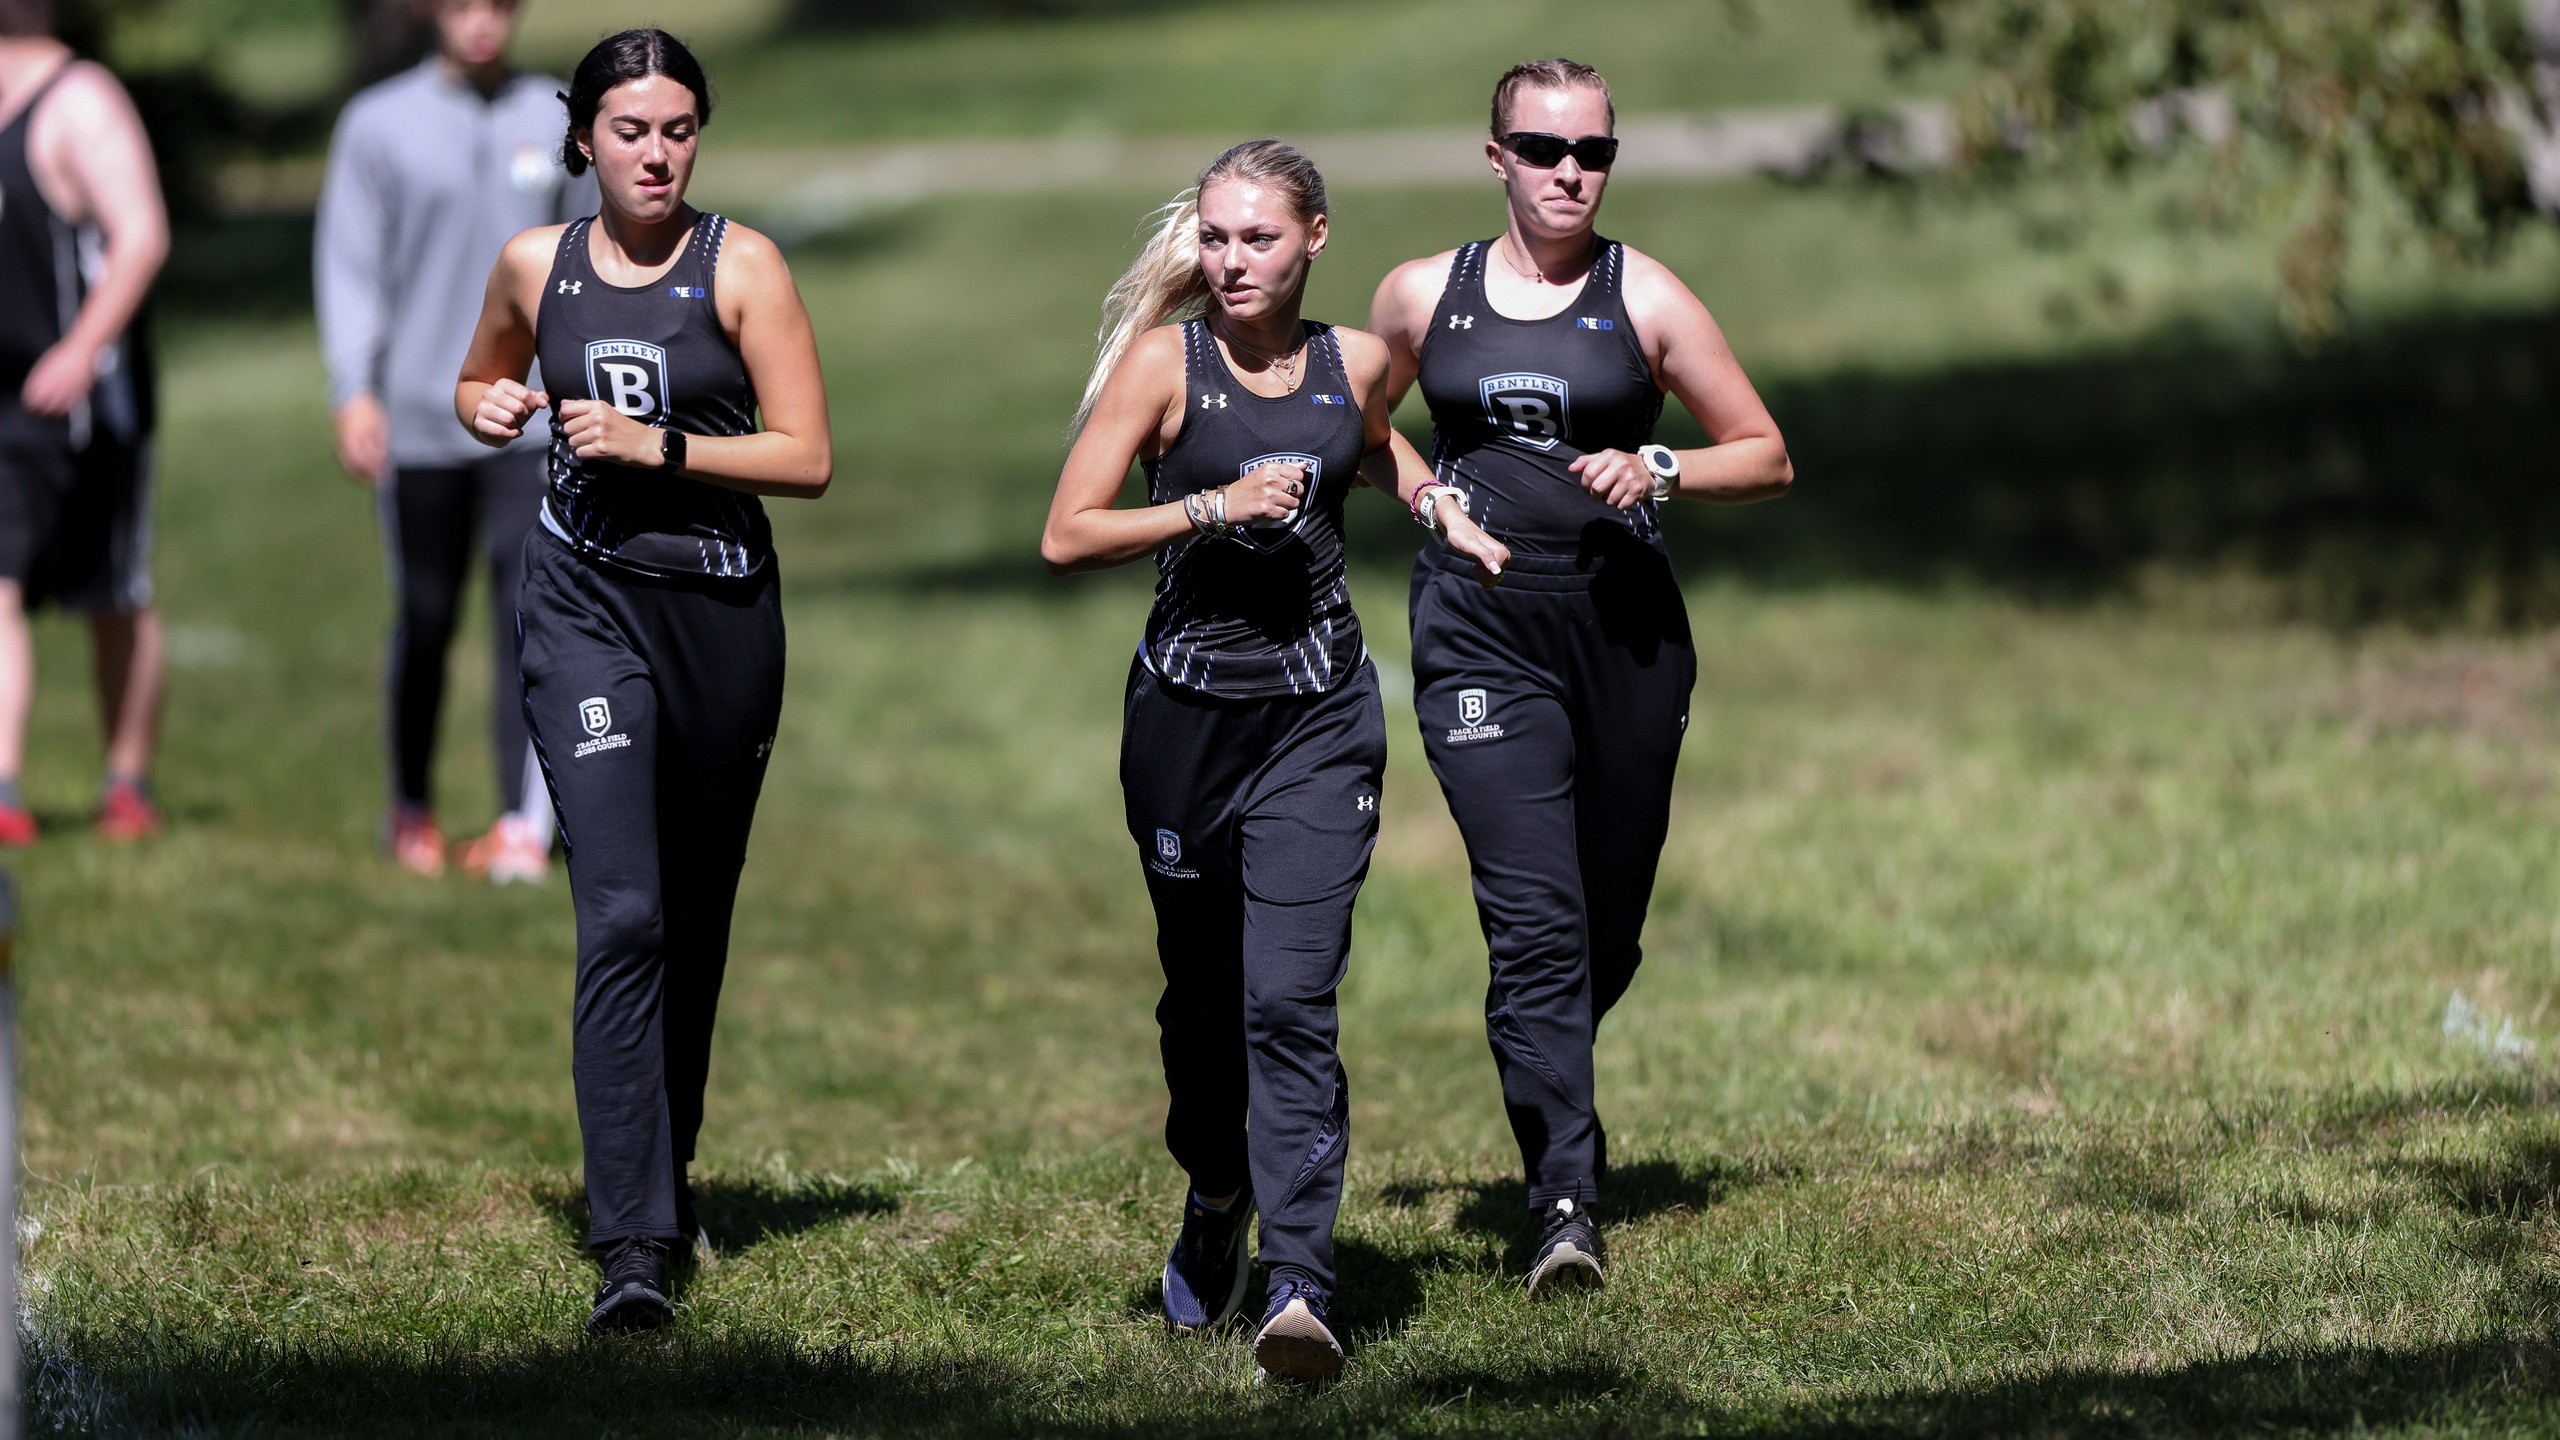 Falcons to run in UMass Dartmouth Invitational for first time in five years